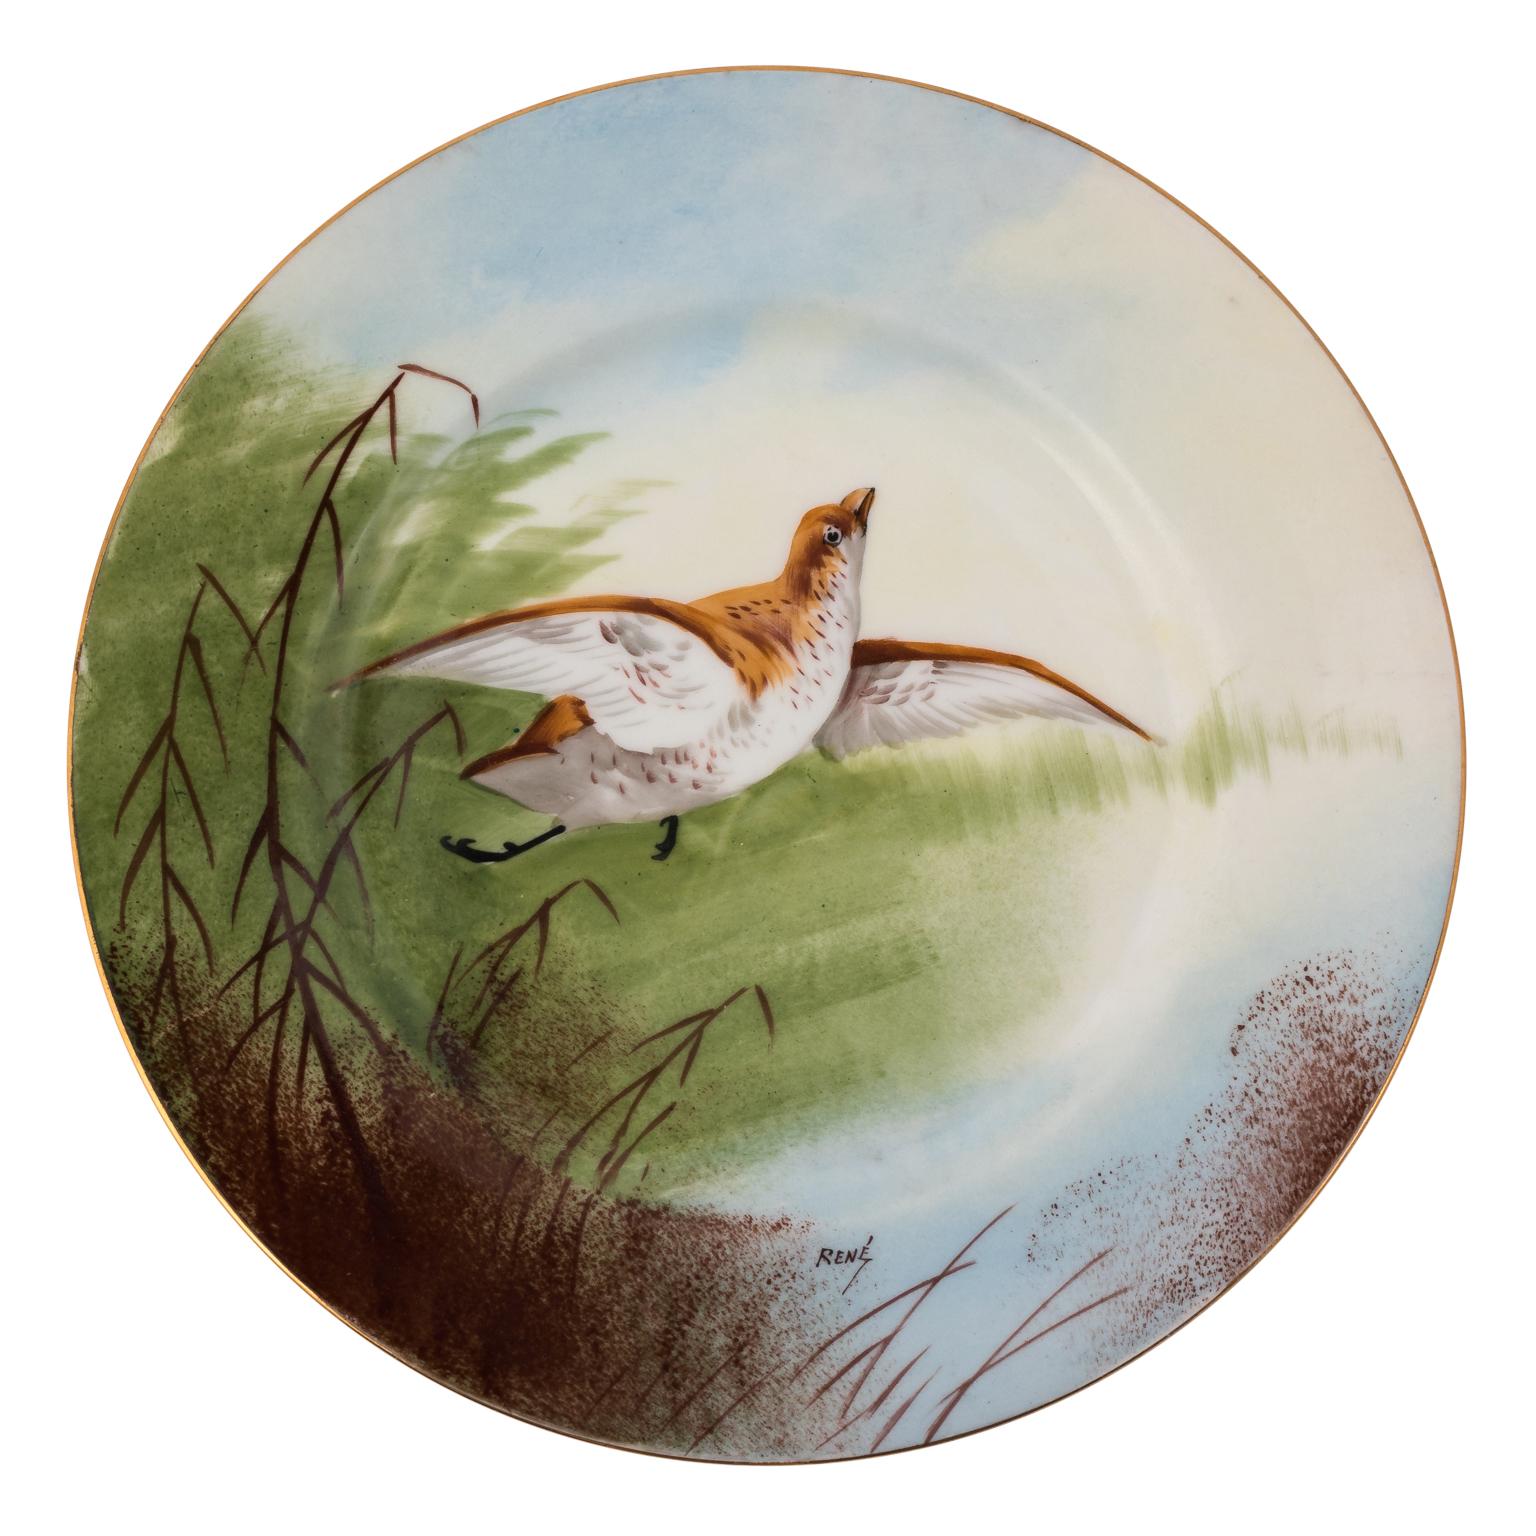 Limoges France hand painted Artist-signed game bird set of 13 pieces with large plater. Measures: 18.50 inch by 12.00 inch plates- 9 3/4 inch diameter. All plates signed Rene.
 